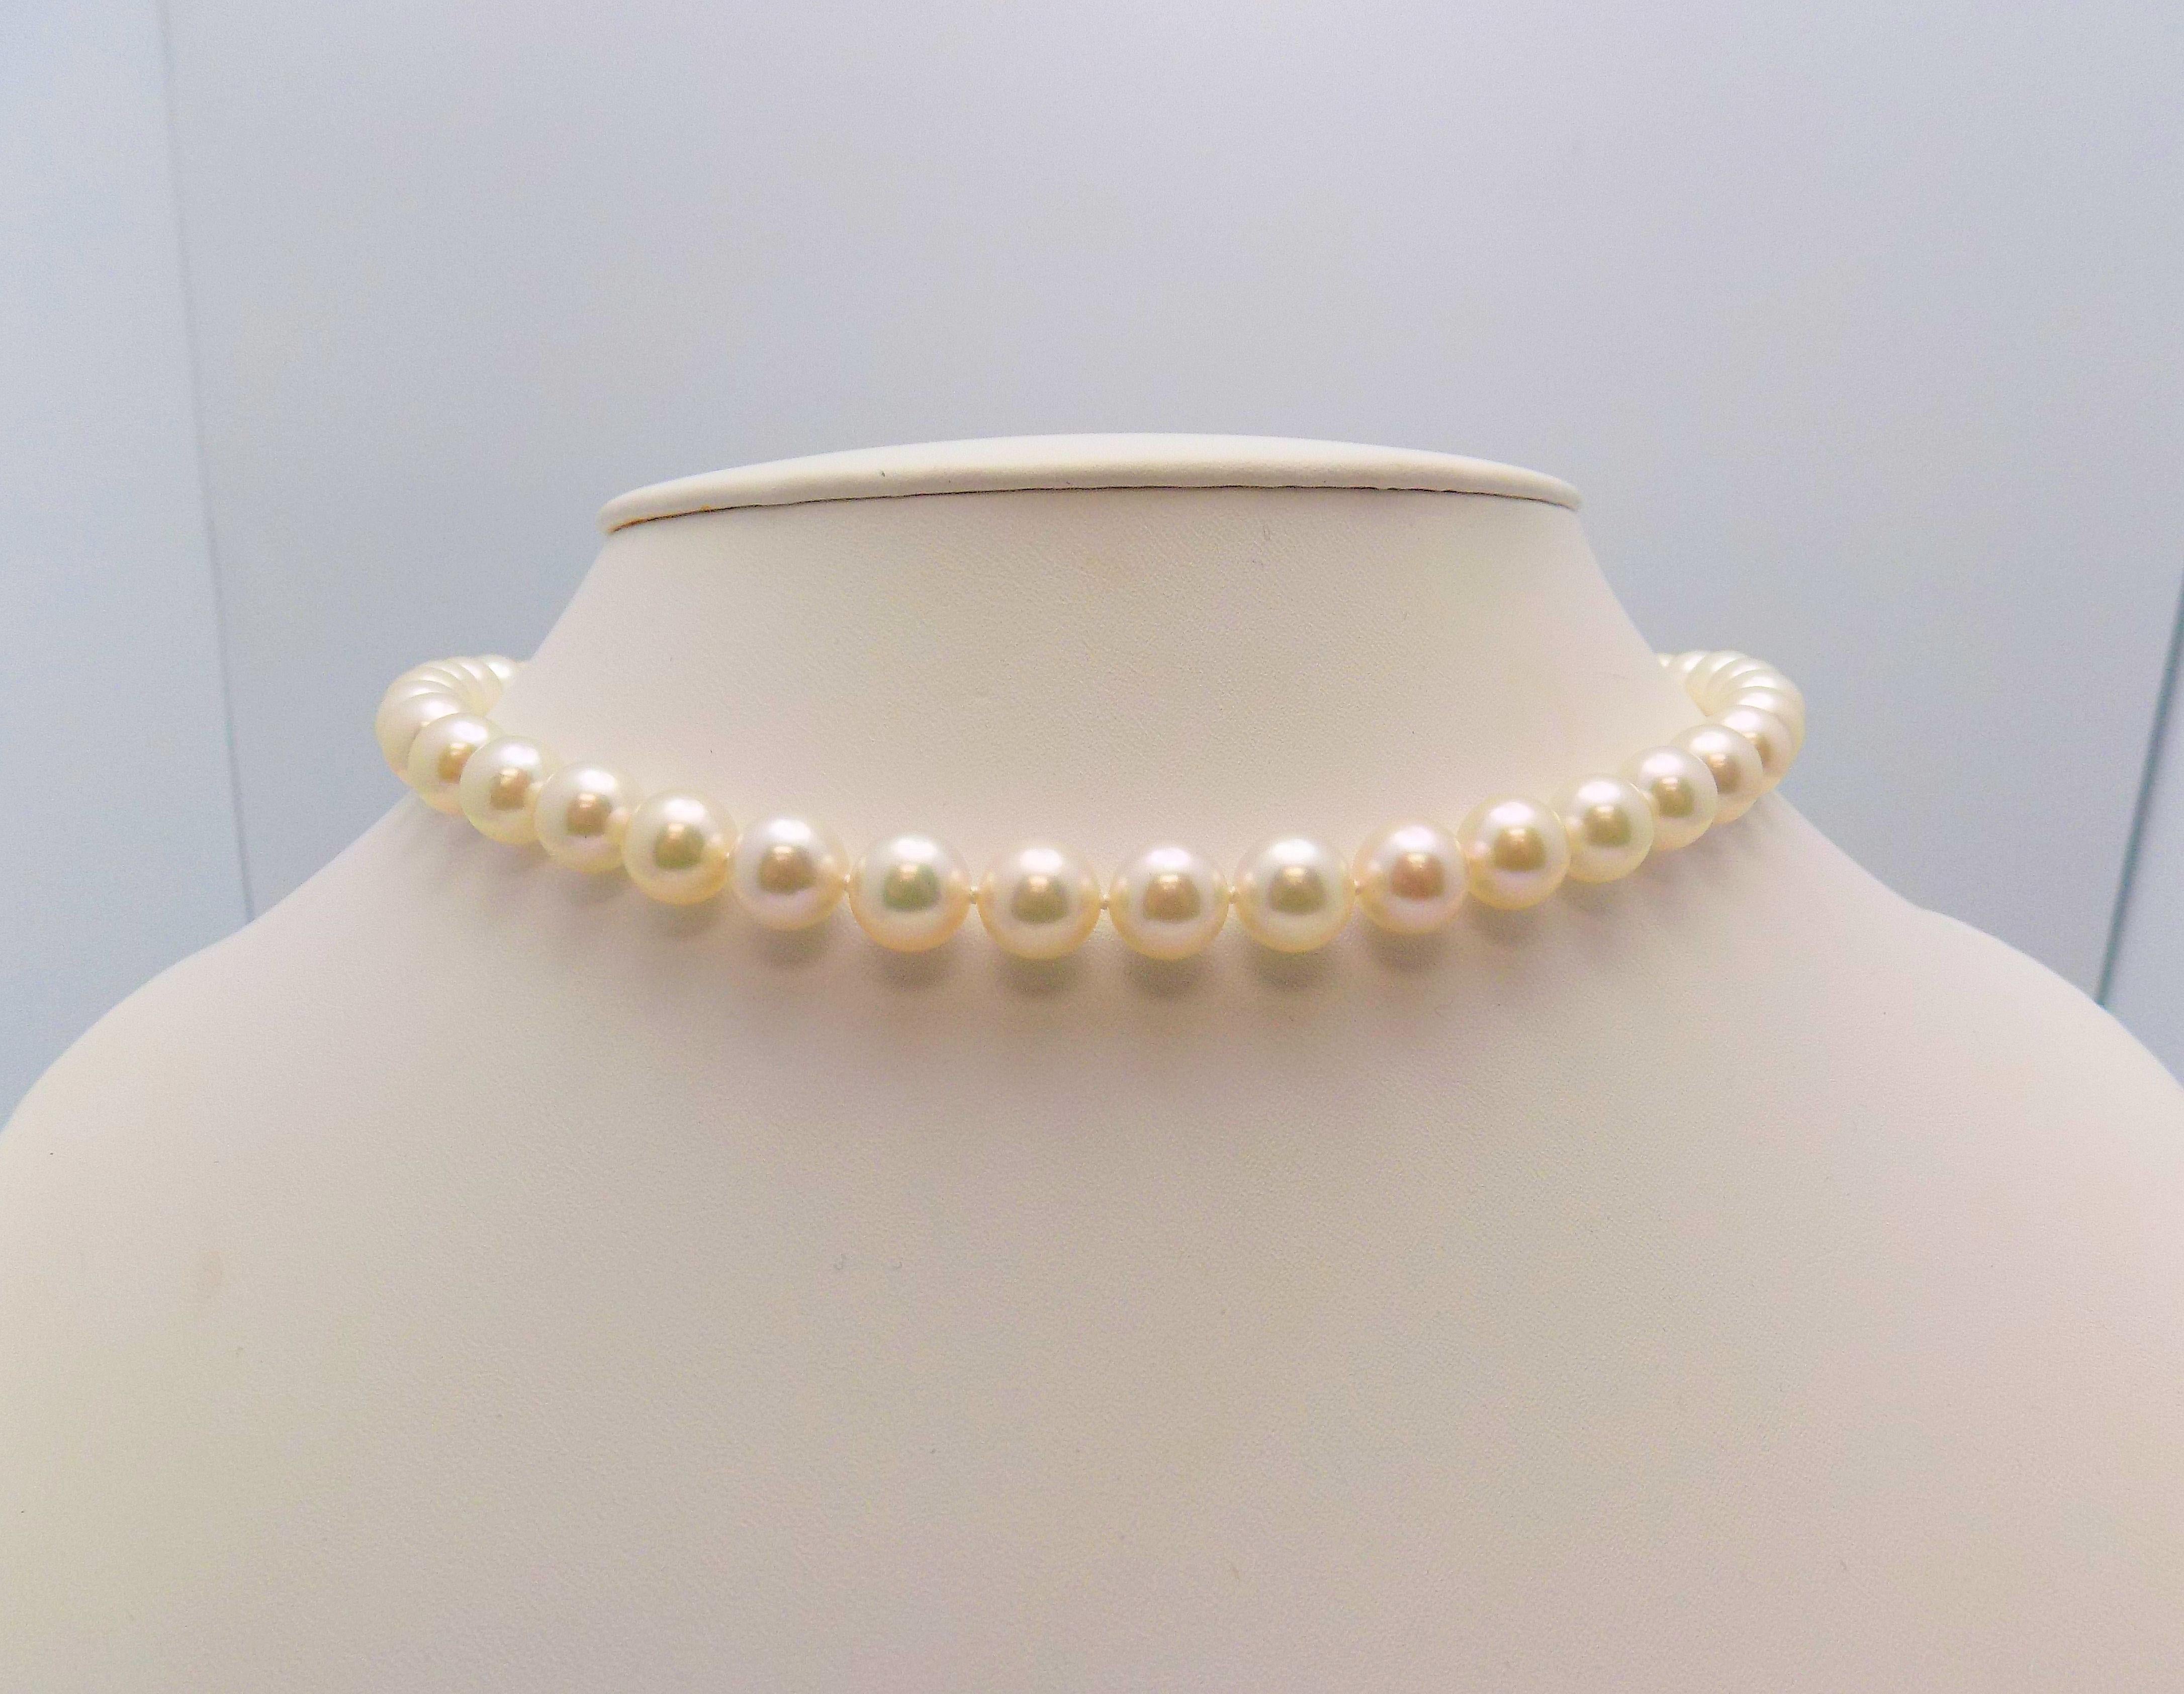 Dreamy Strand of 45 Cultured Pearls Measuring 9 X 9.5 MM. Extremely Well-Matched Cream Rose, Excellent Luster.  18 Karat White Gold Push/Turn Ball Clasp has 20 Round Brilliant Diamonds 0.27 Carat Total Weight, VS, G . 17.5” Long.  

The Jewelry